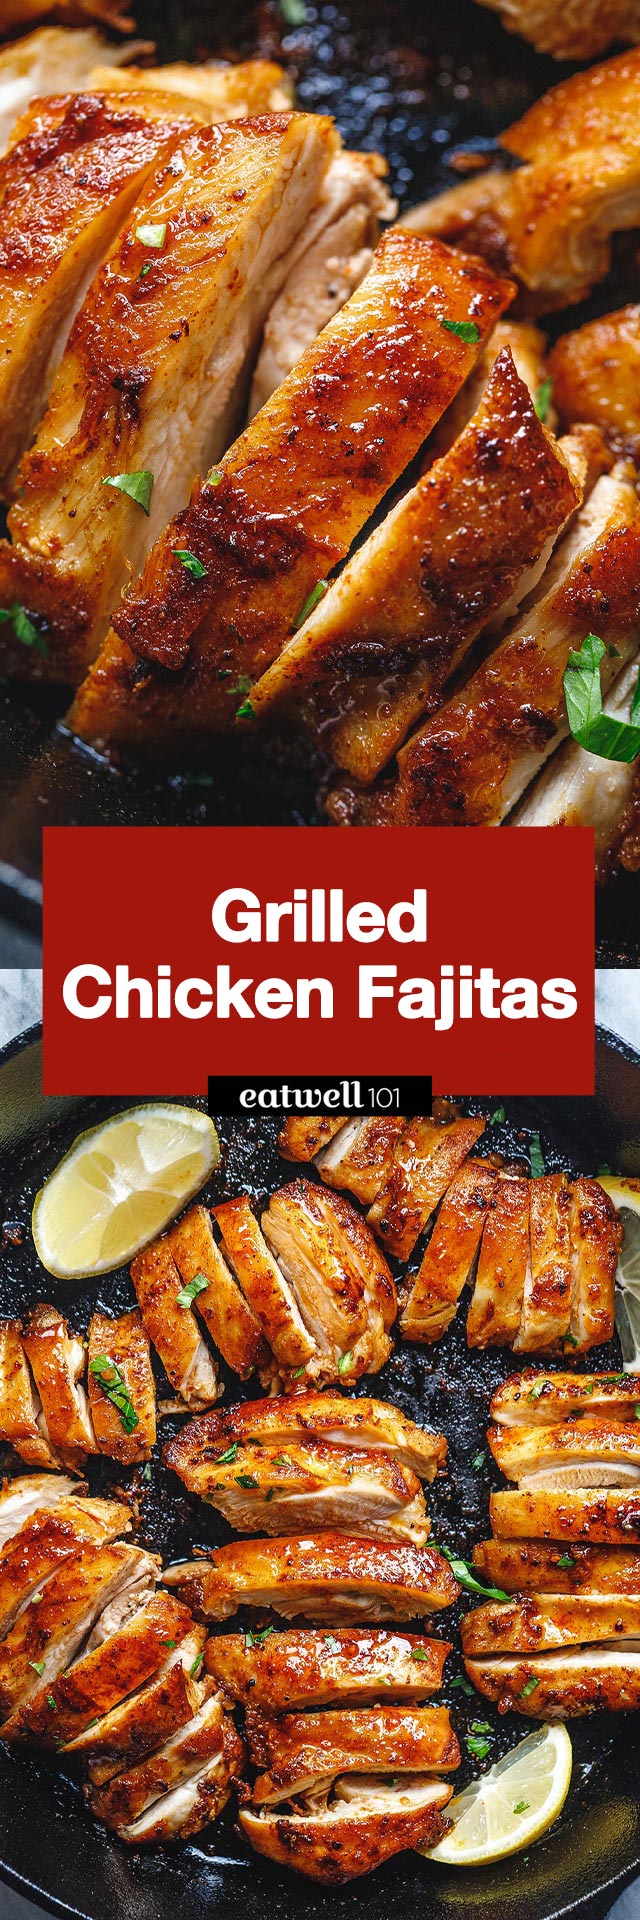 Grilled Chicken Fajitas - #grilled #chicken #fajitas #recipe #eatwell101 - These grilled chicken fajitas are delicious comfort food everyone will go crazy for! 